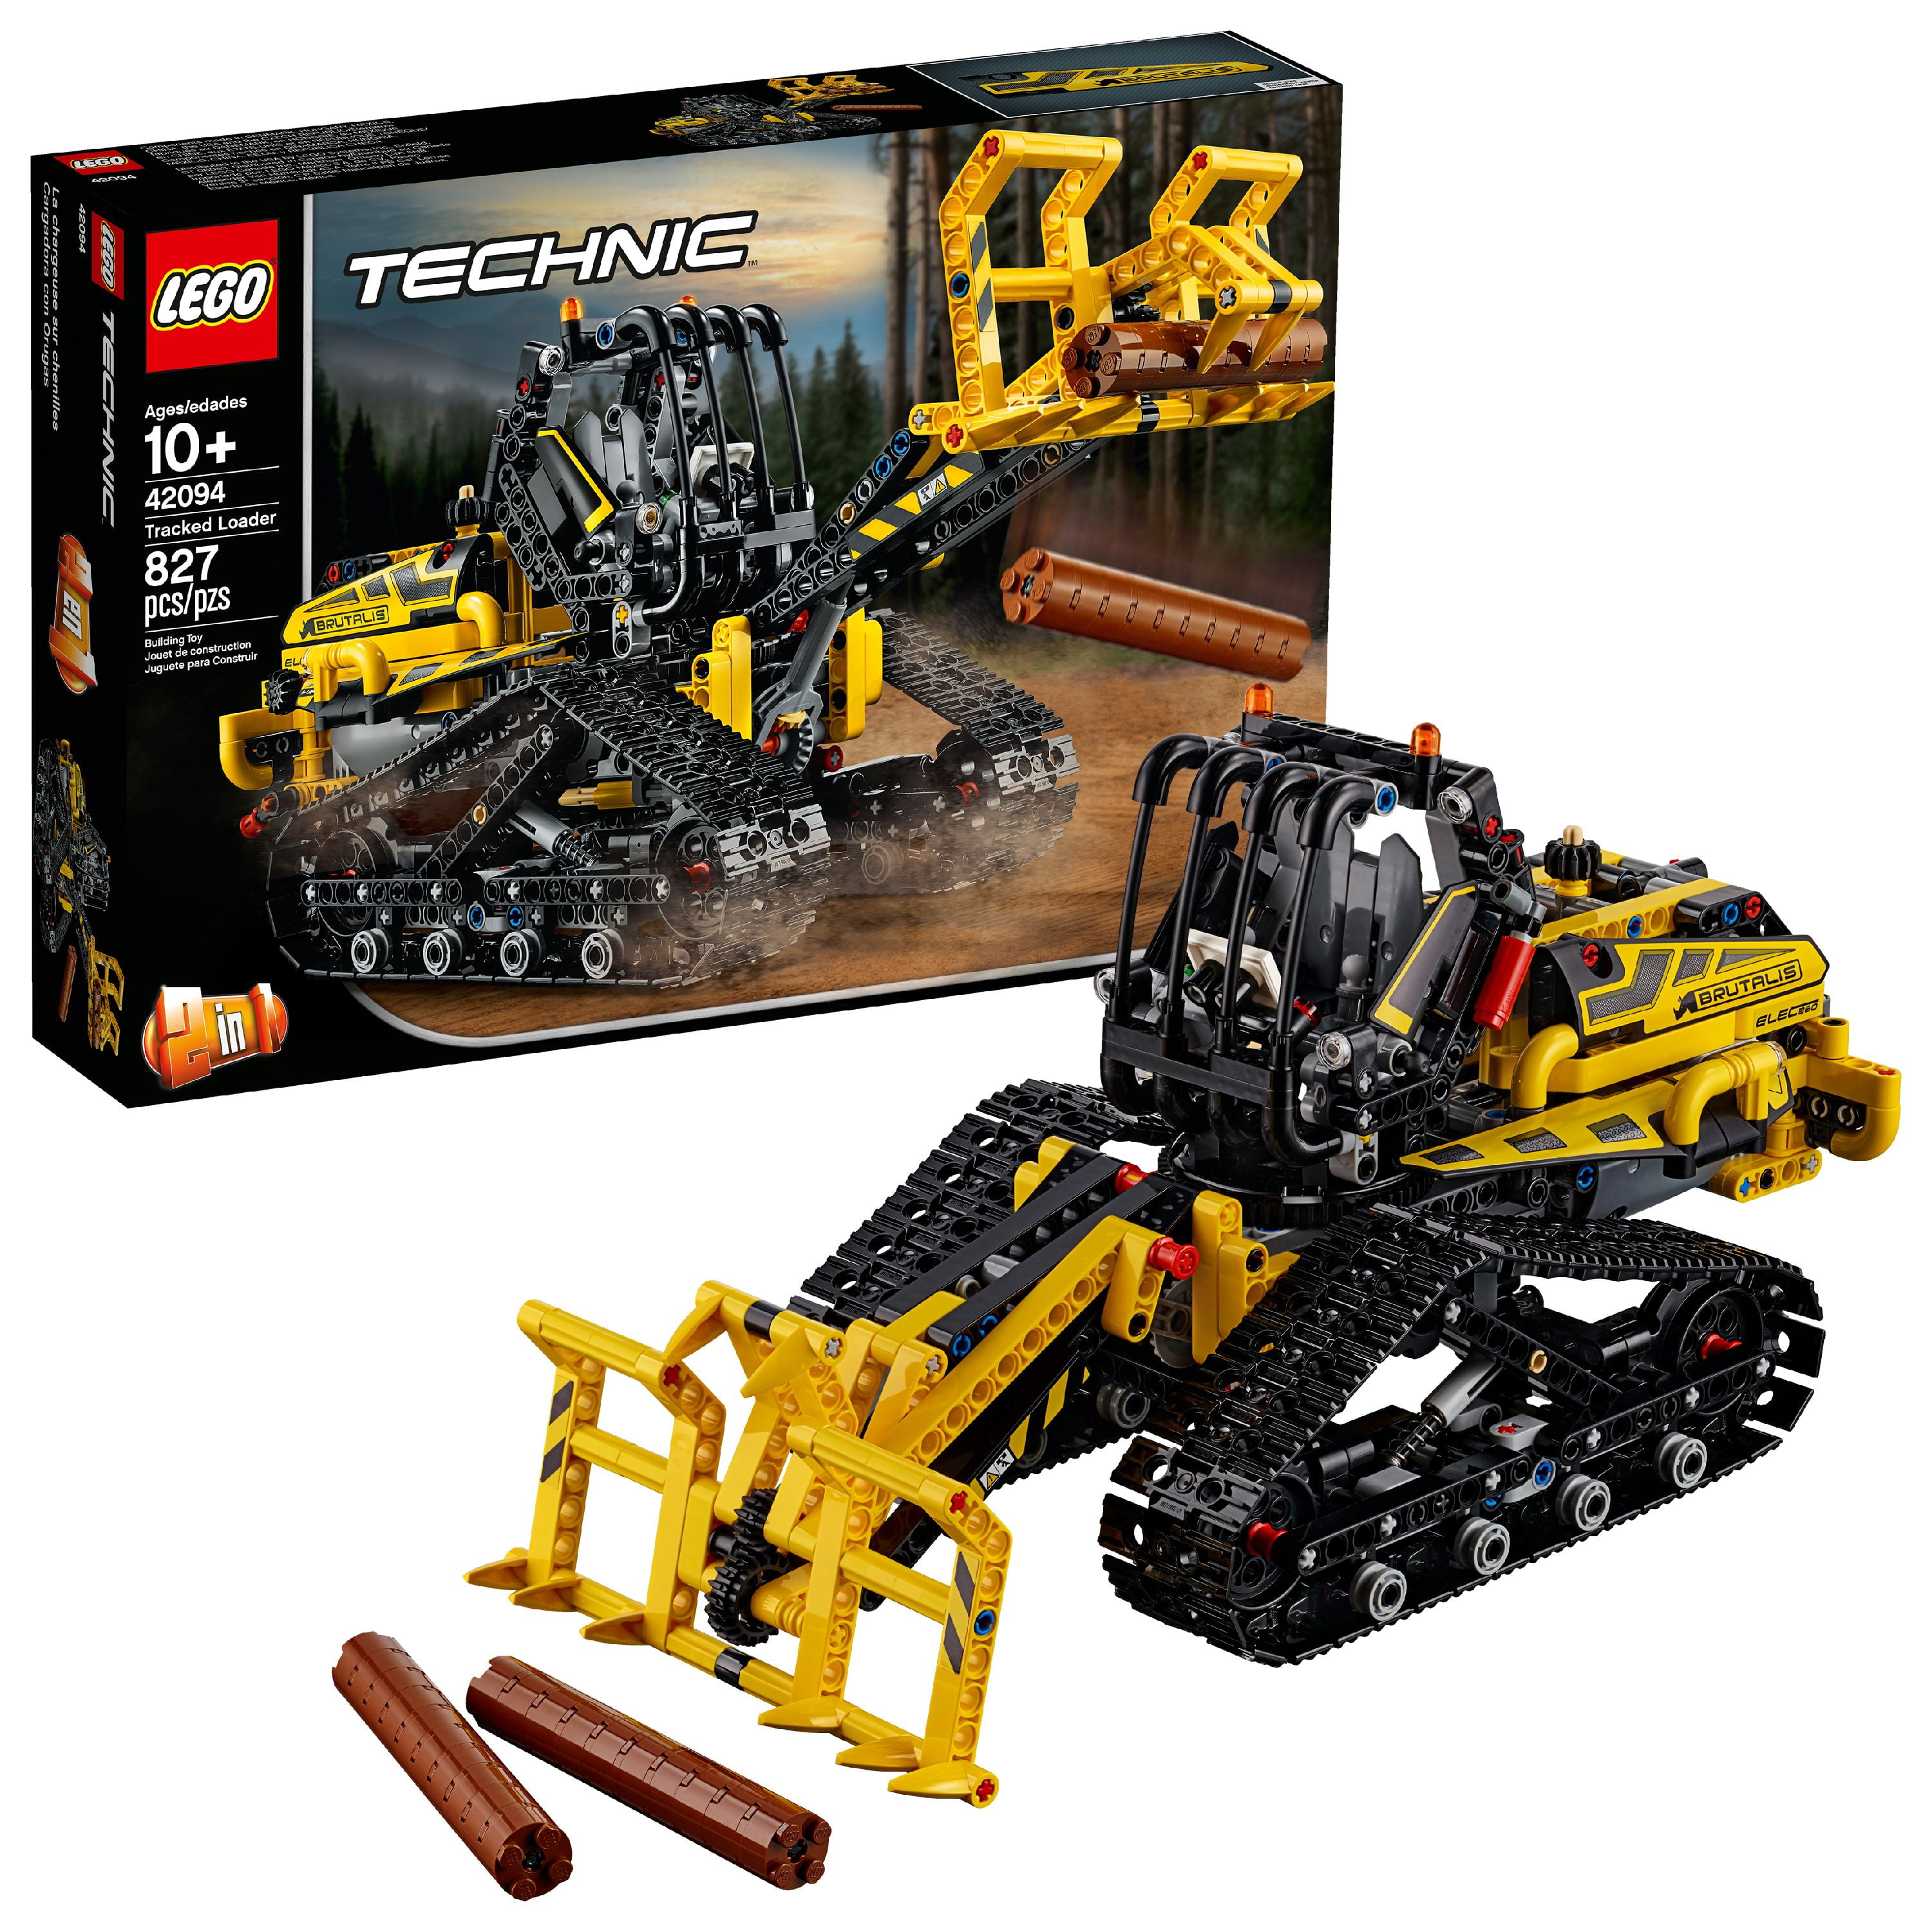 Digger Model Engineering Kit 133 pieces Build and Construct Your Own 